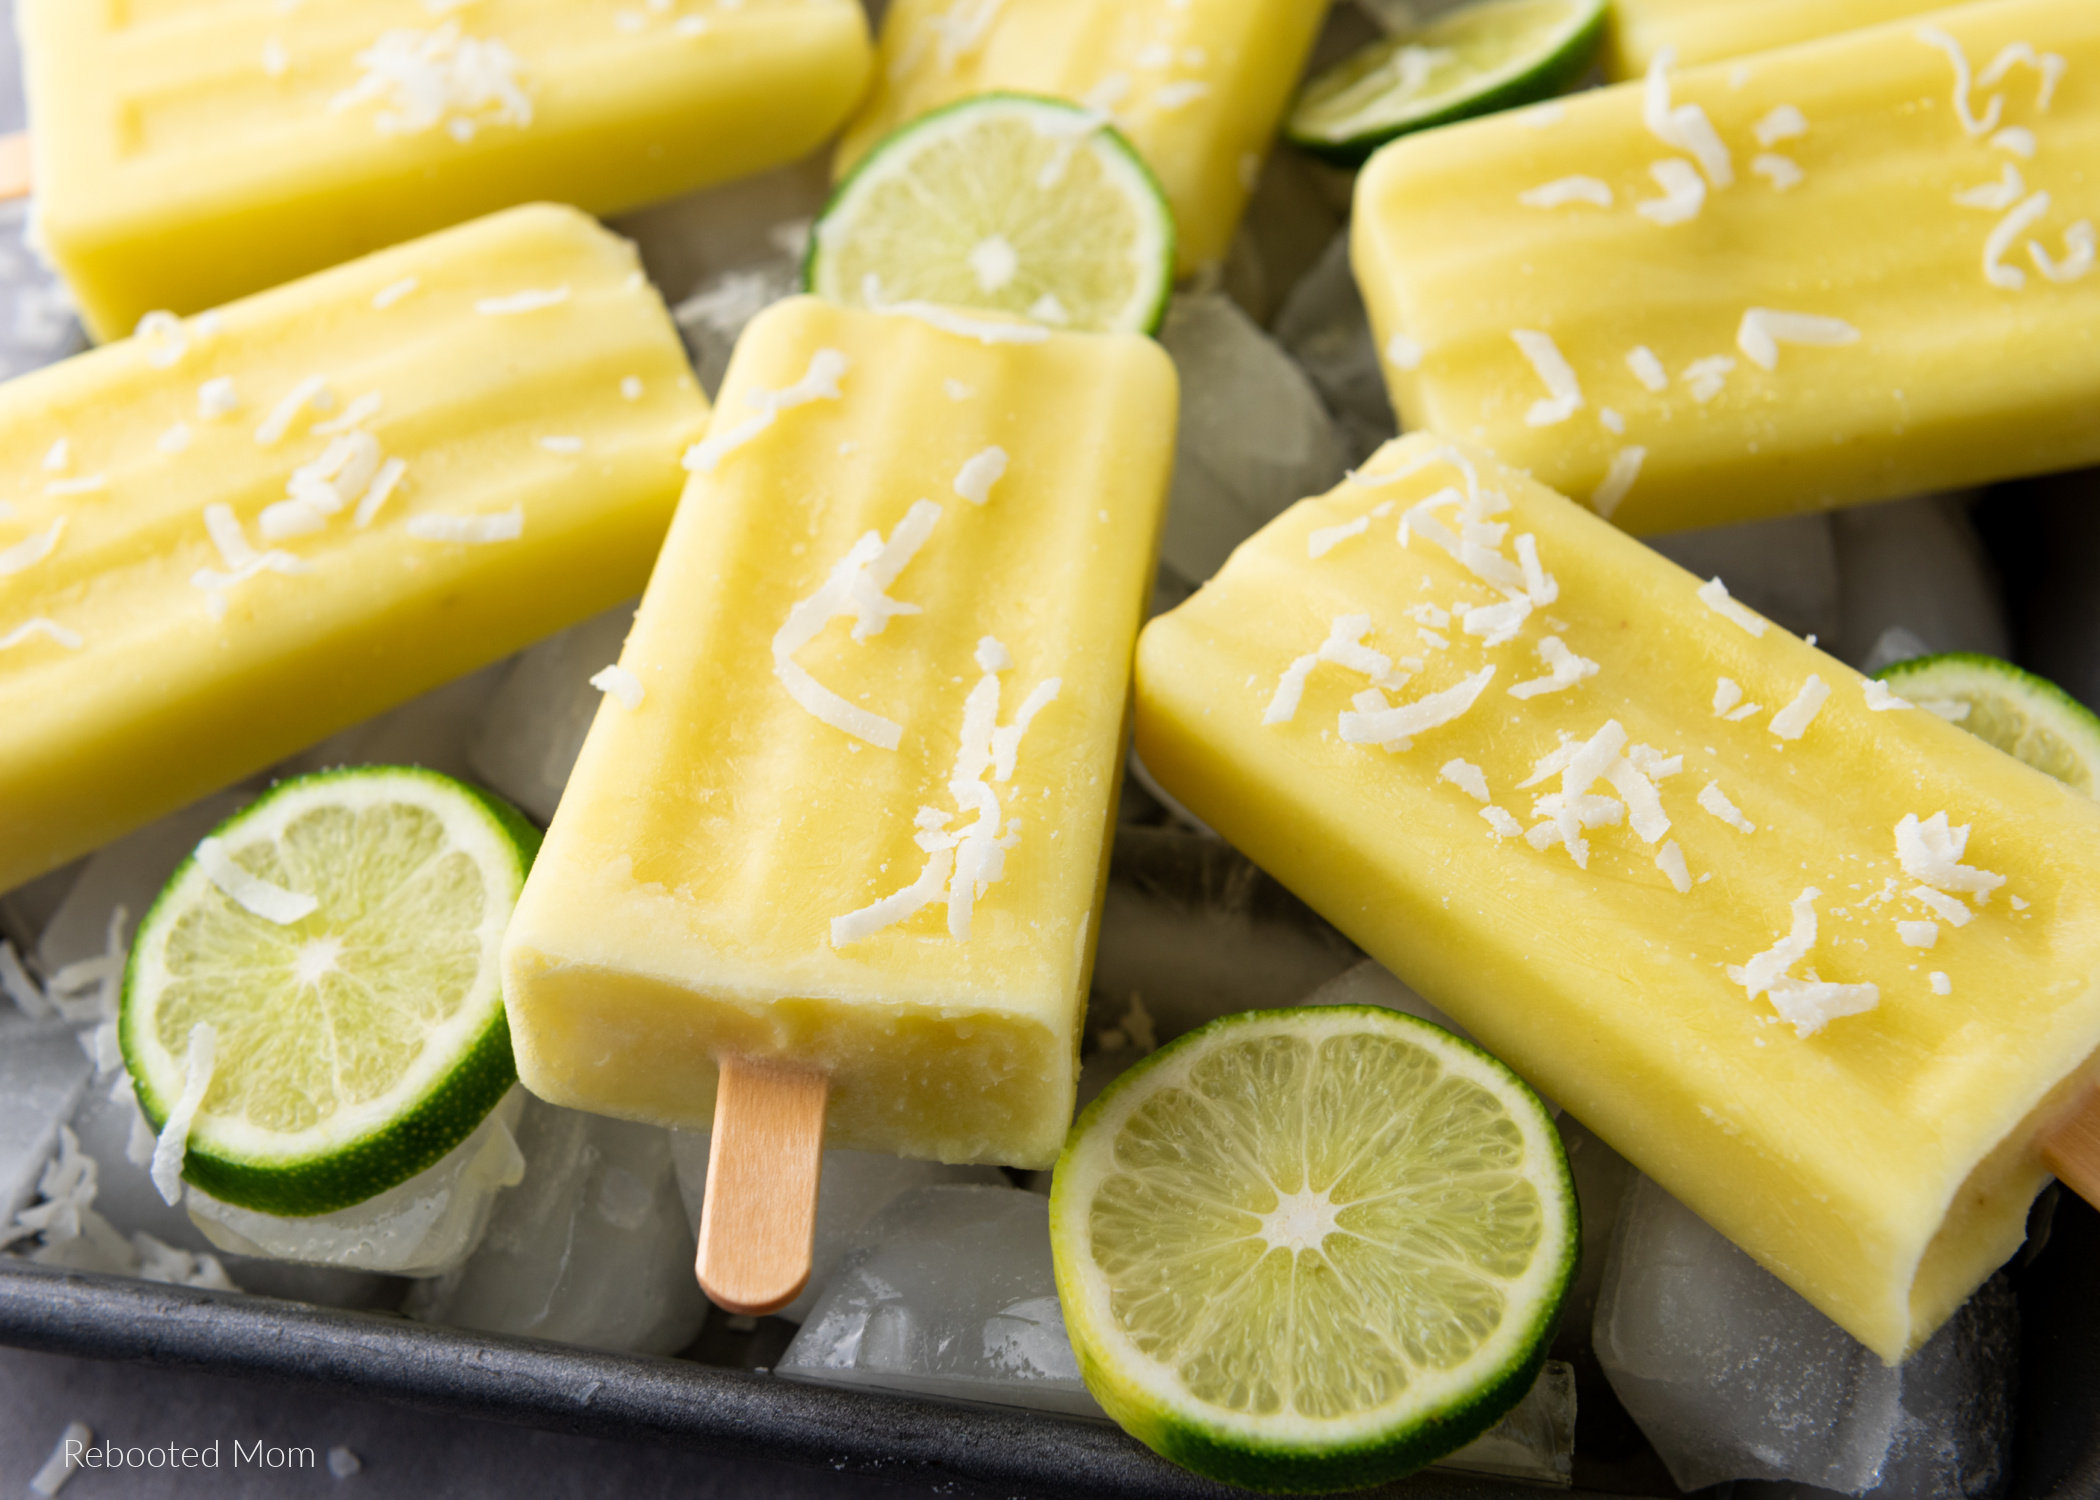 Delicious Pineapple Coconut Lime Popsicles, made with just four simple ingredients in ten minutes or less - the perfect way to welcome summer!